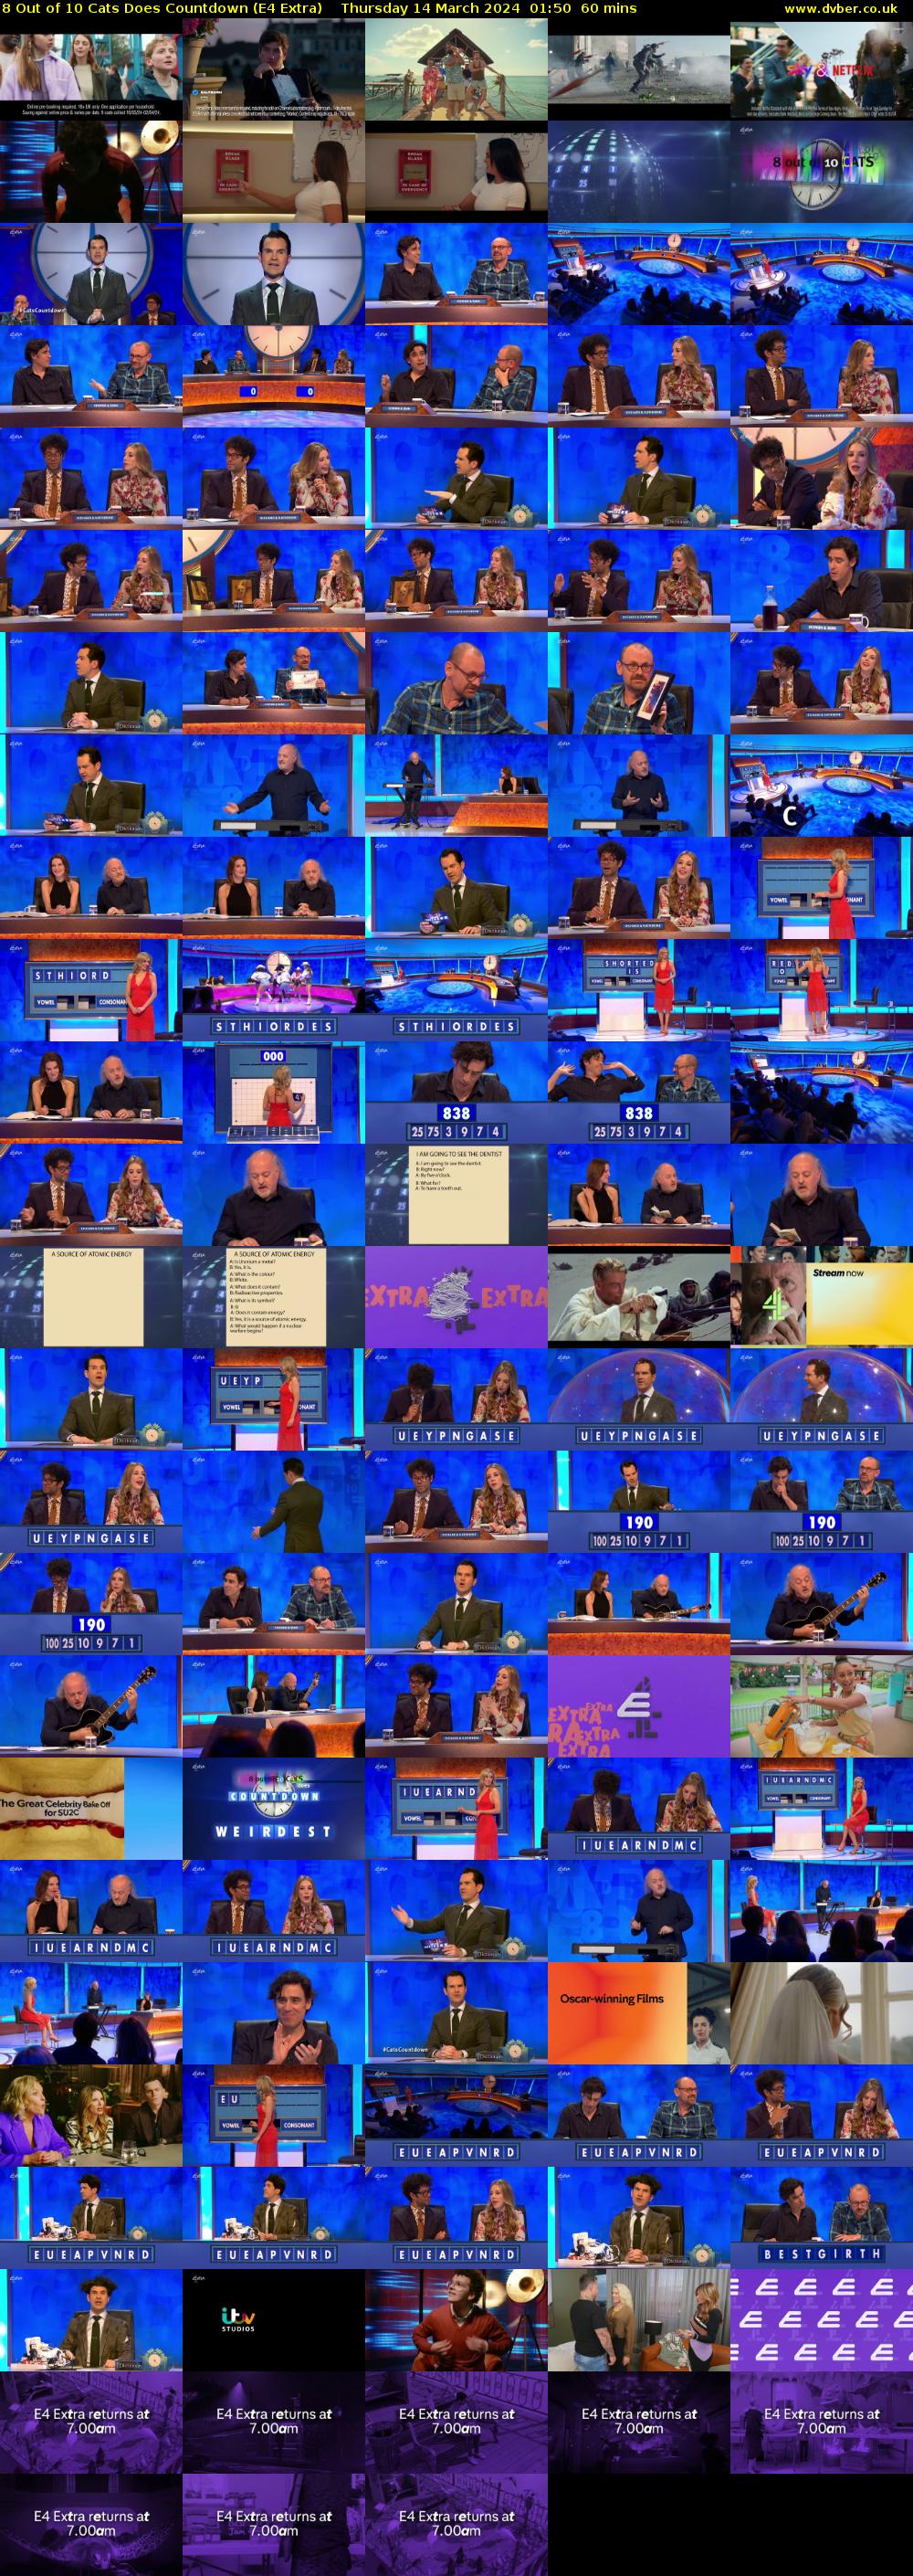 8 Out of 10 Cats Does Countdown (E4 Extra) Thursday 14 March 2024 01:50 - 02:50